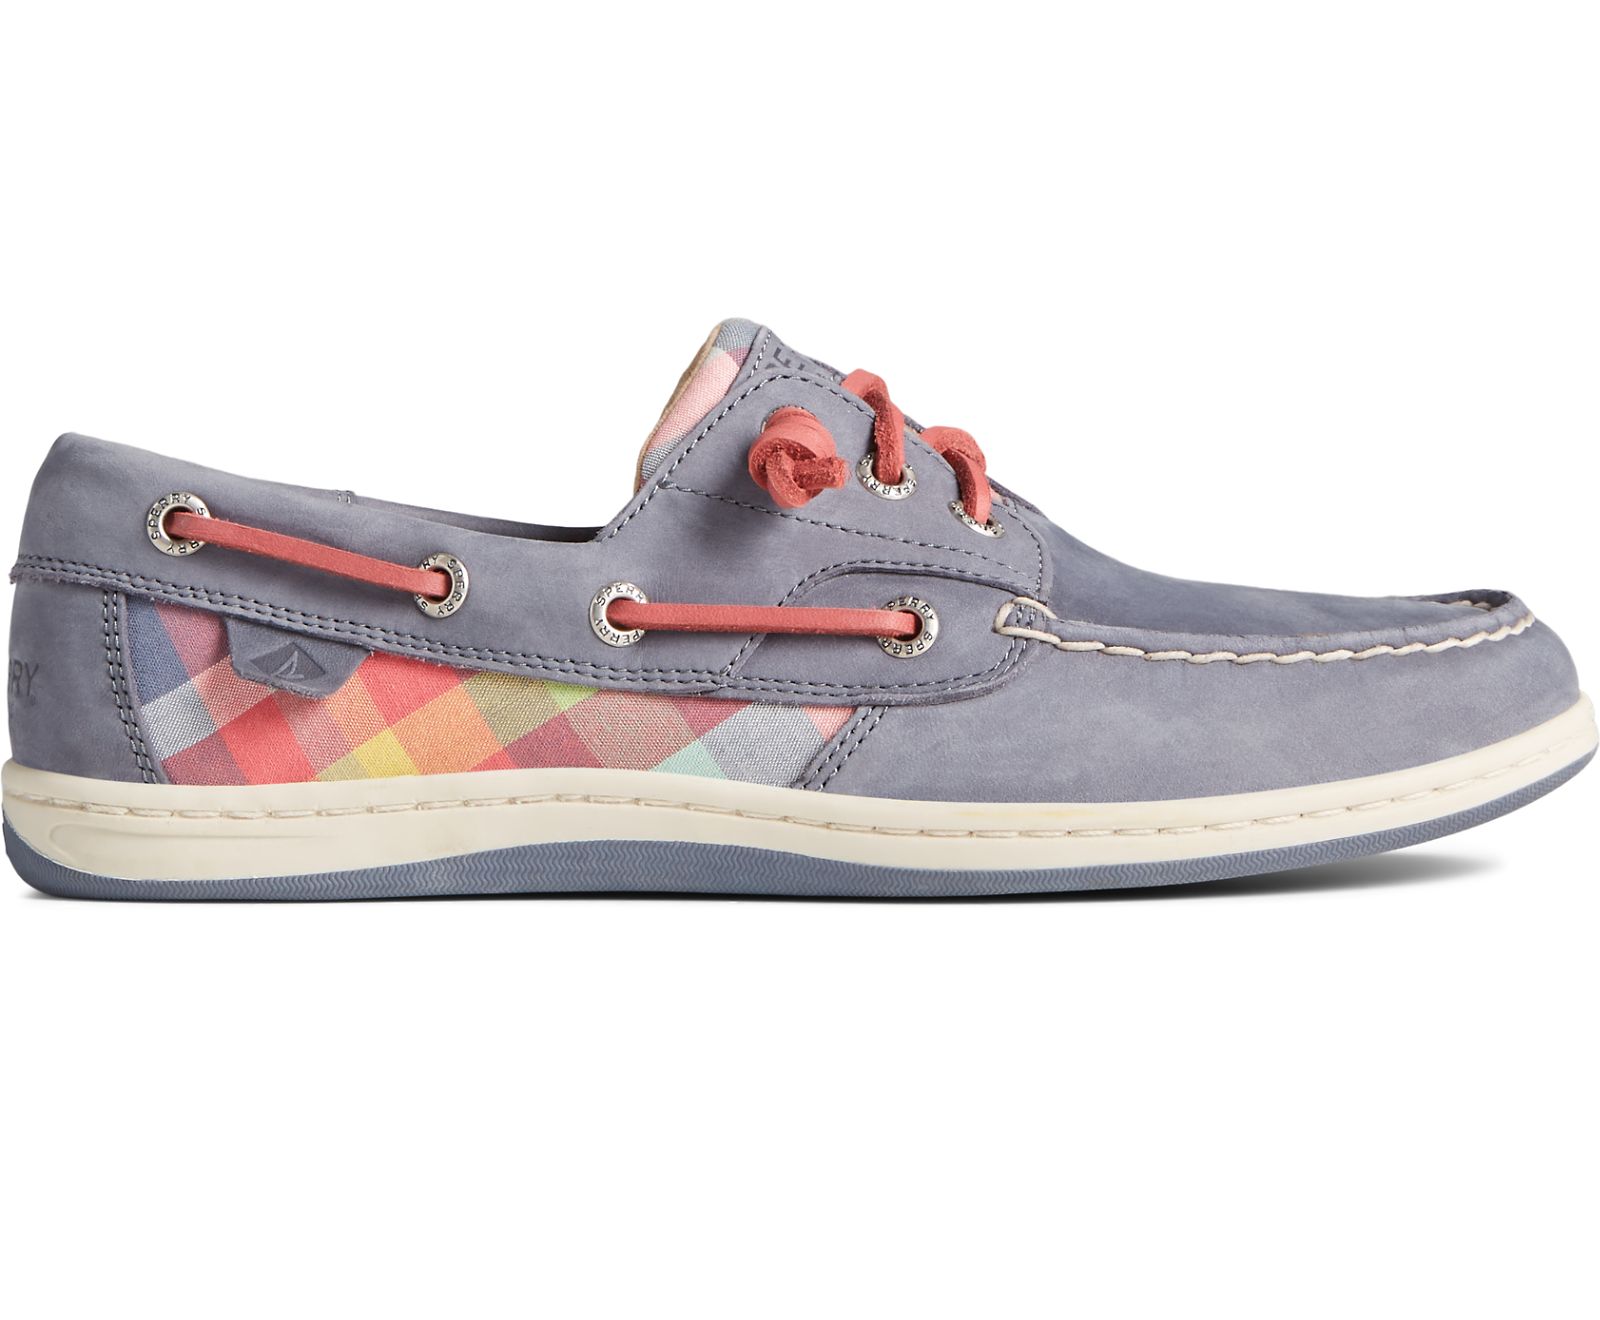 Women's Songfish Plaid Boat Shoe - Navy/Plaid - Click Image to Close